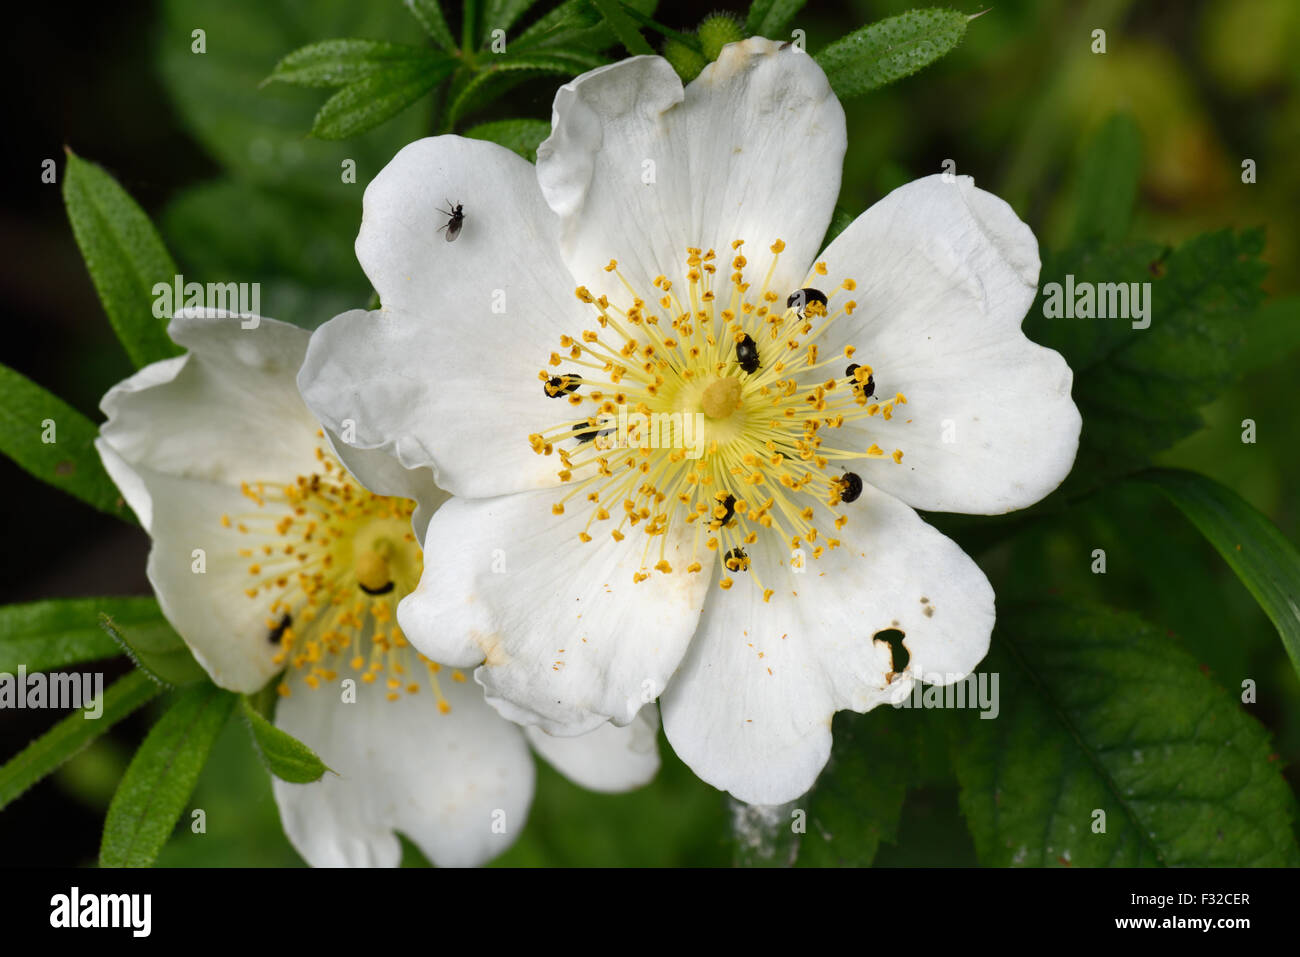 Field rose, Rosa arvensis, white flowers on a wild scrambling rose plant with pollen beetles, Meligethes aeneus, Berkshire, England, June Stock Photo